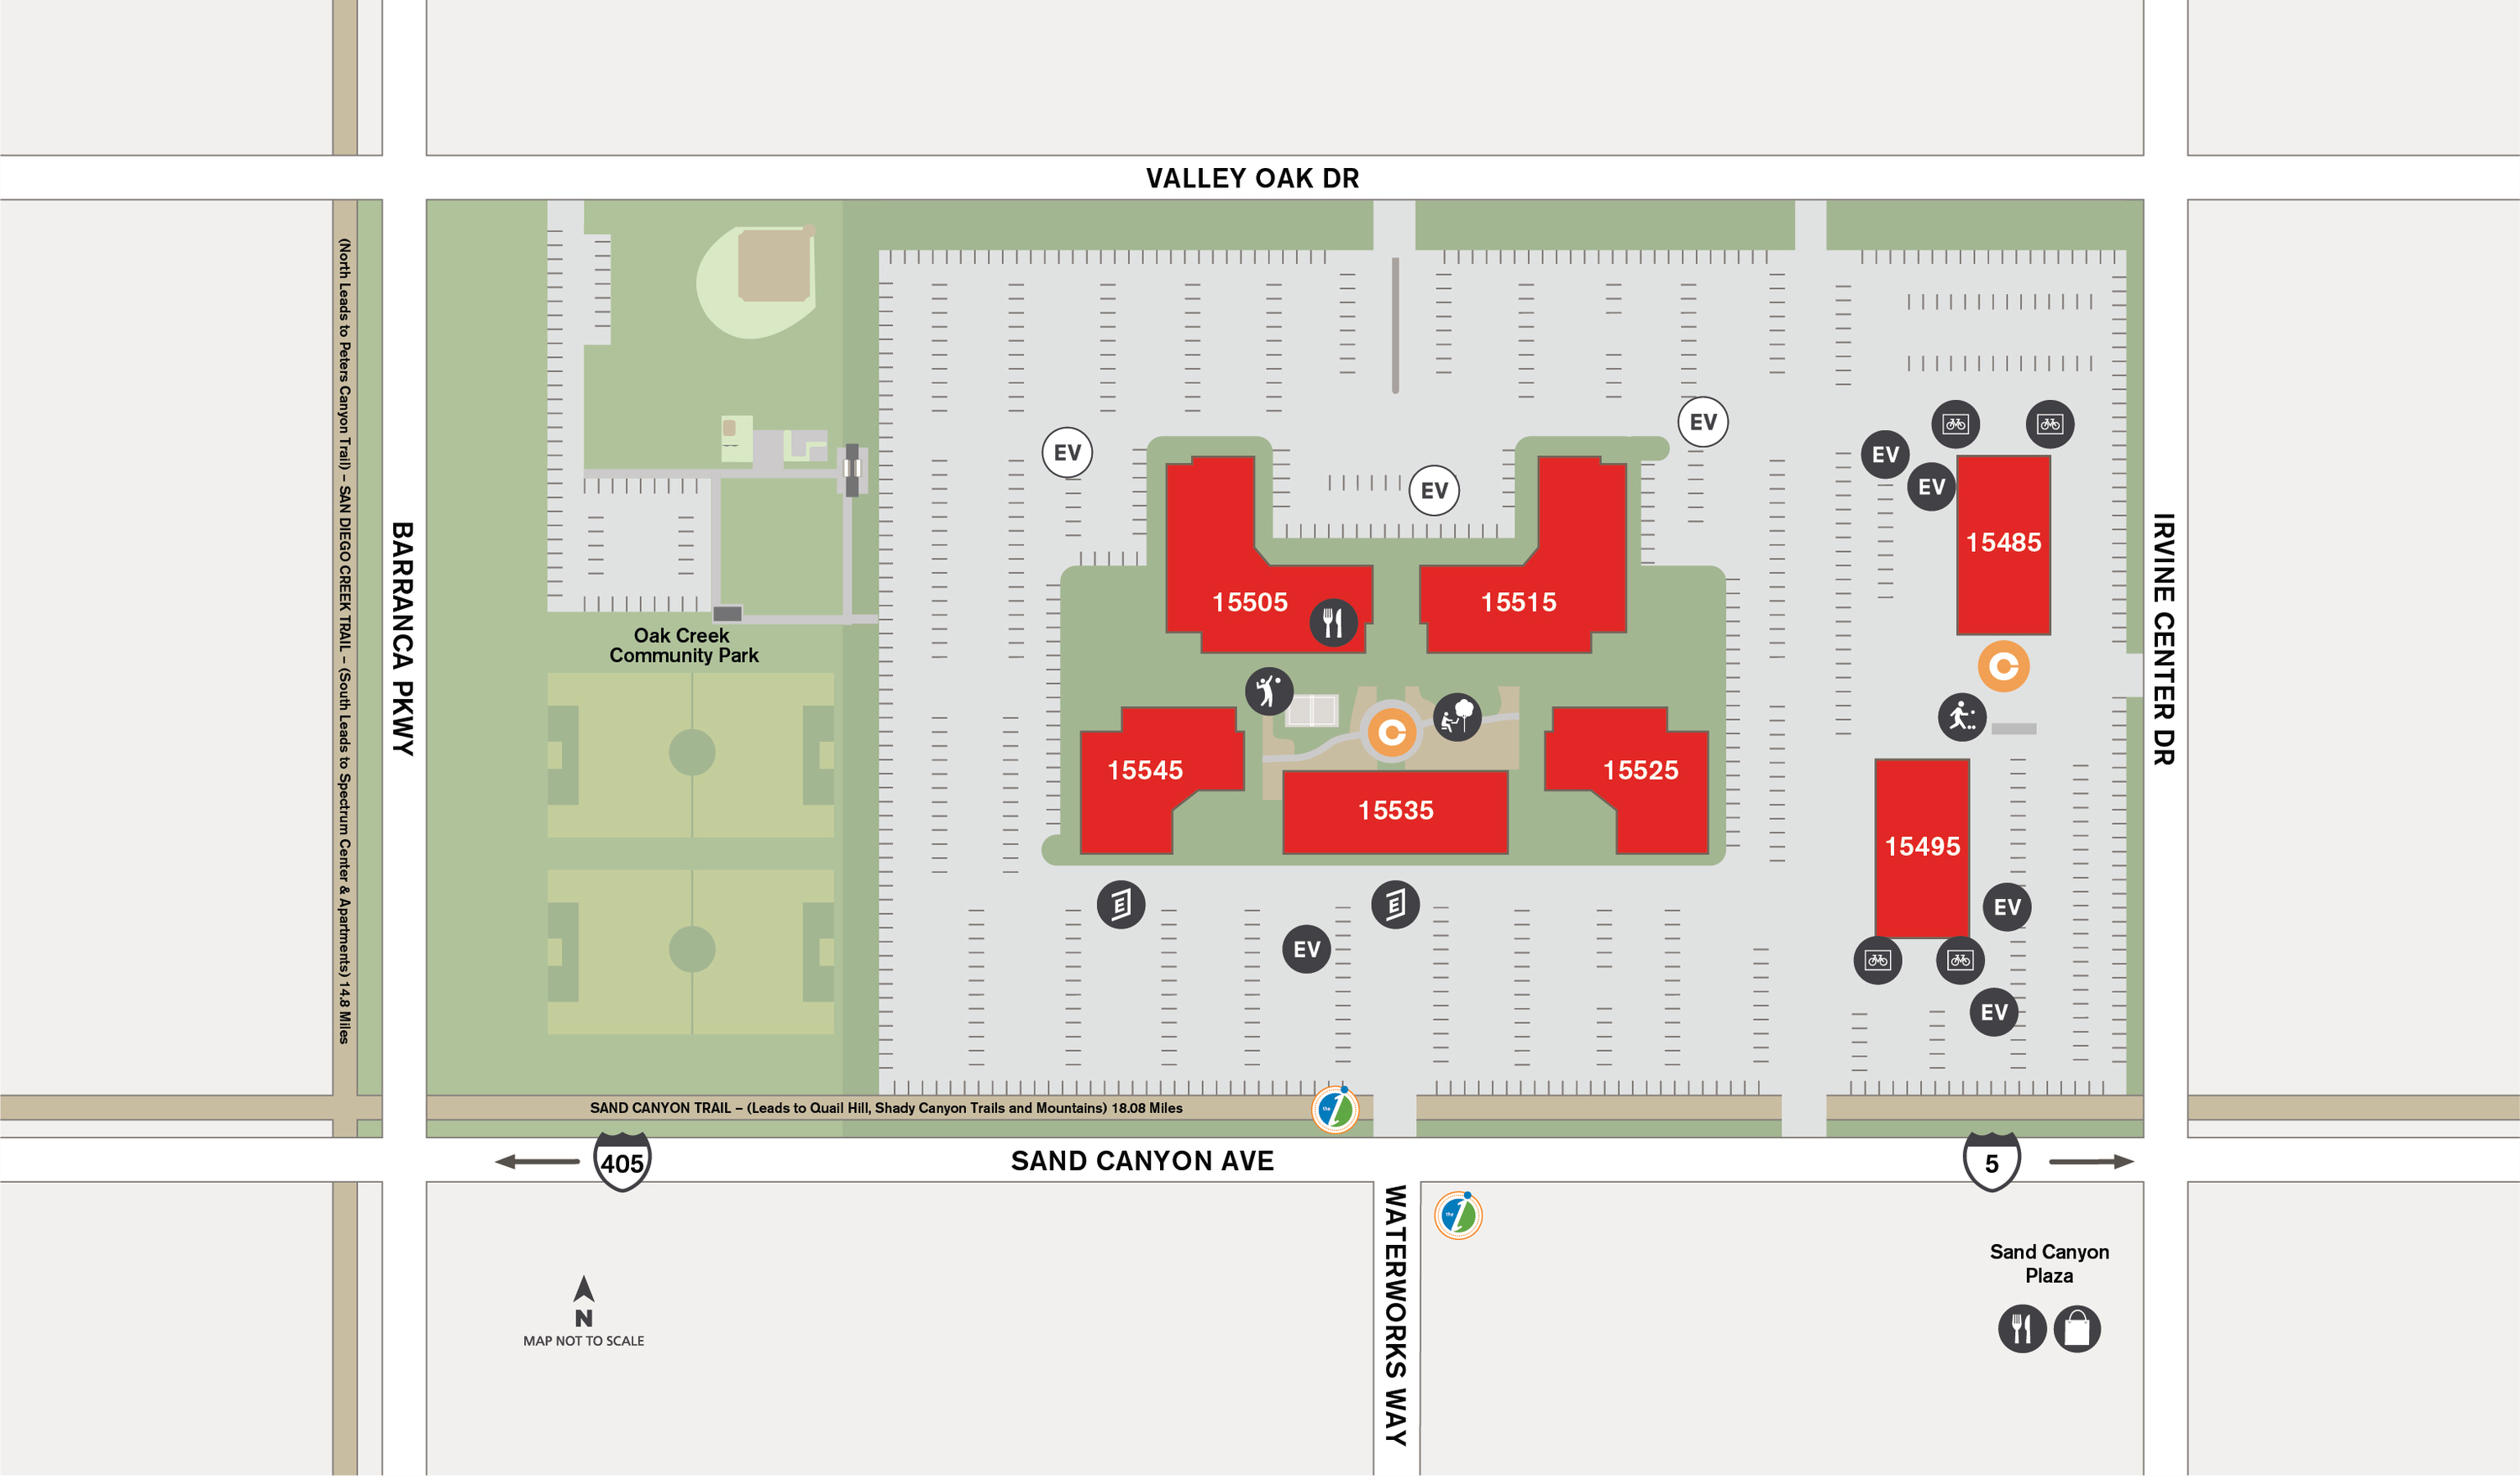 Site Map for Sand Canyon Business Center located in Irvine, CA.